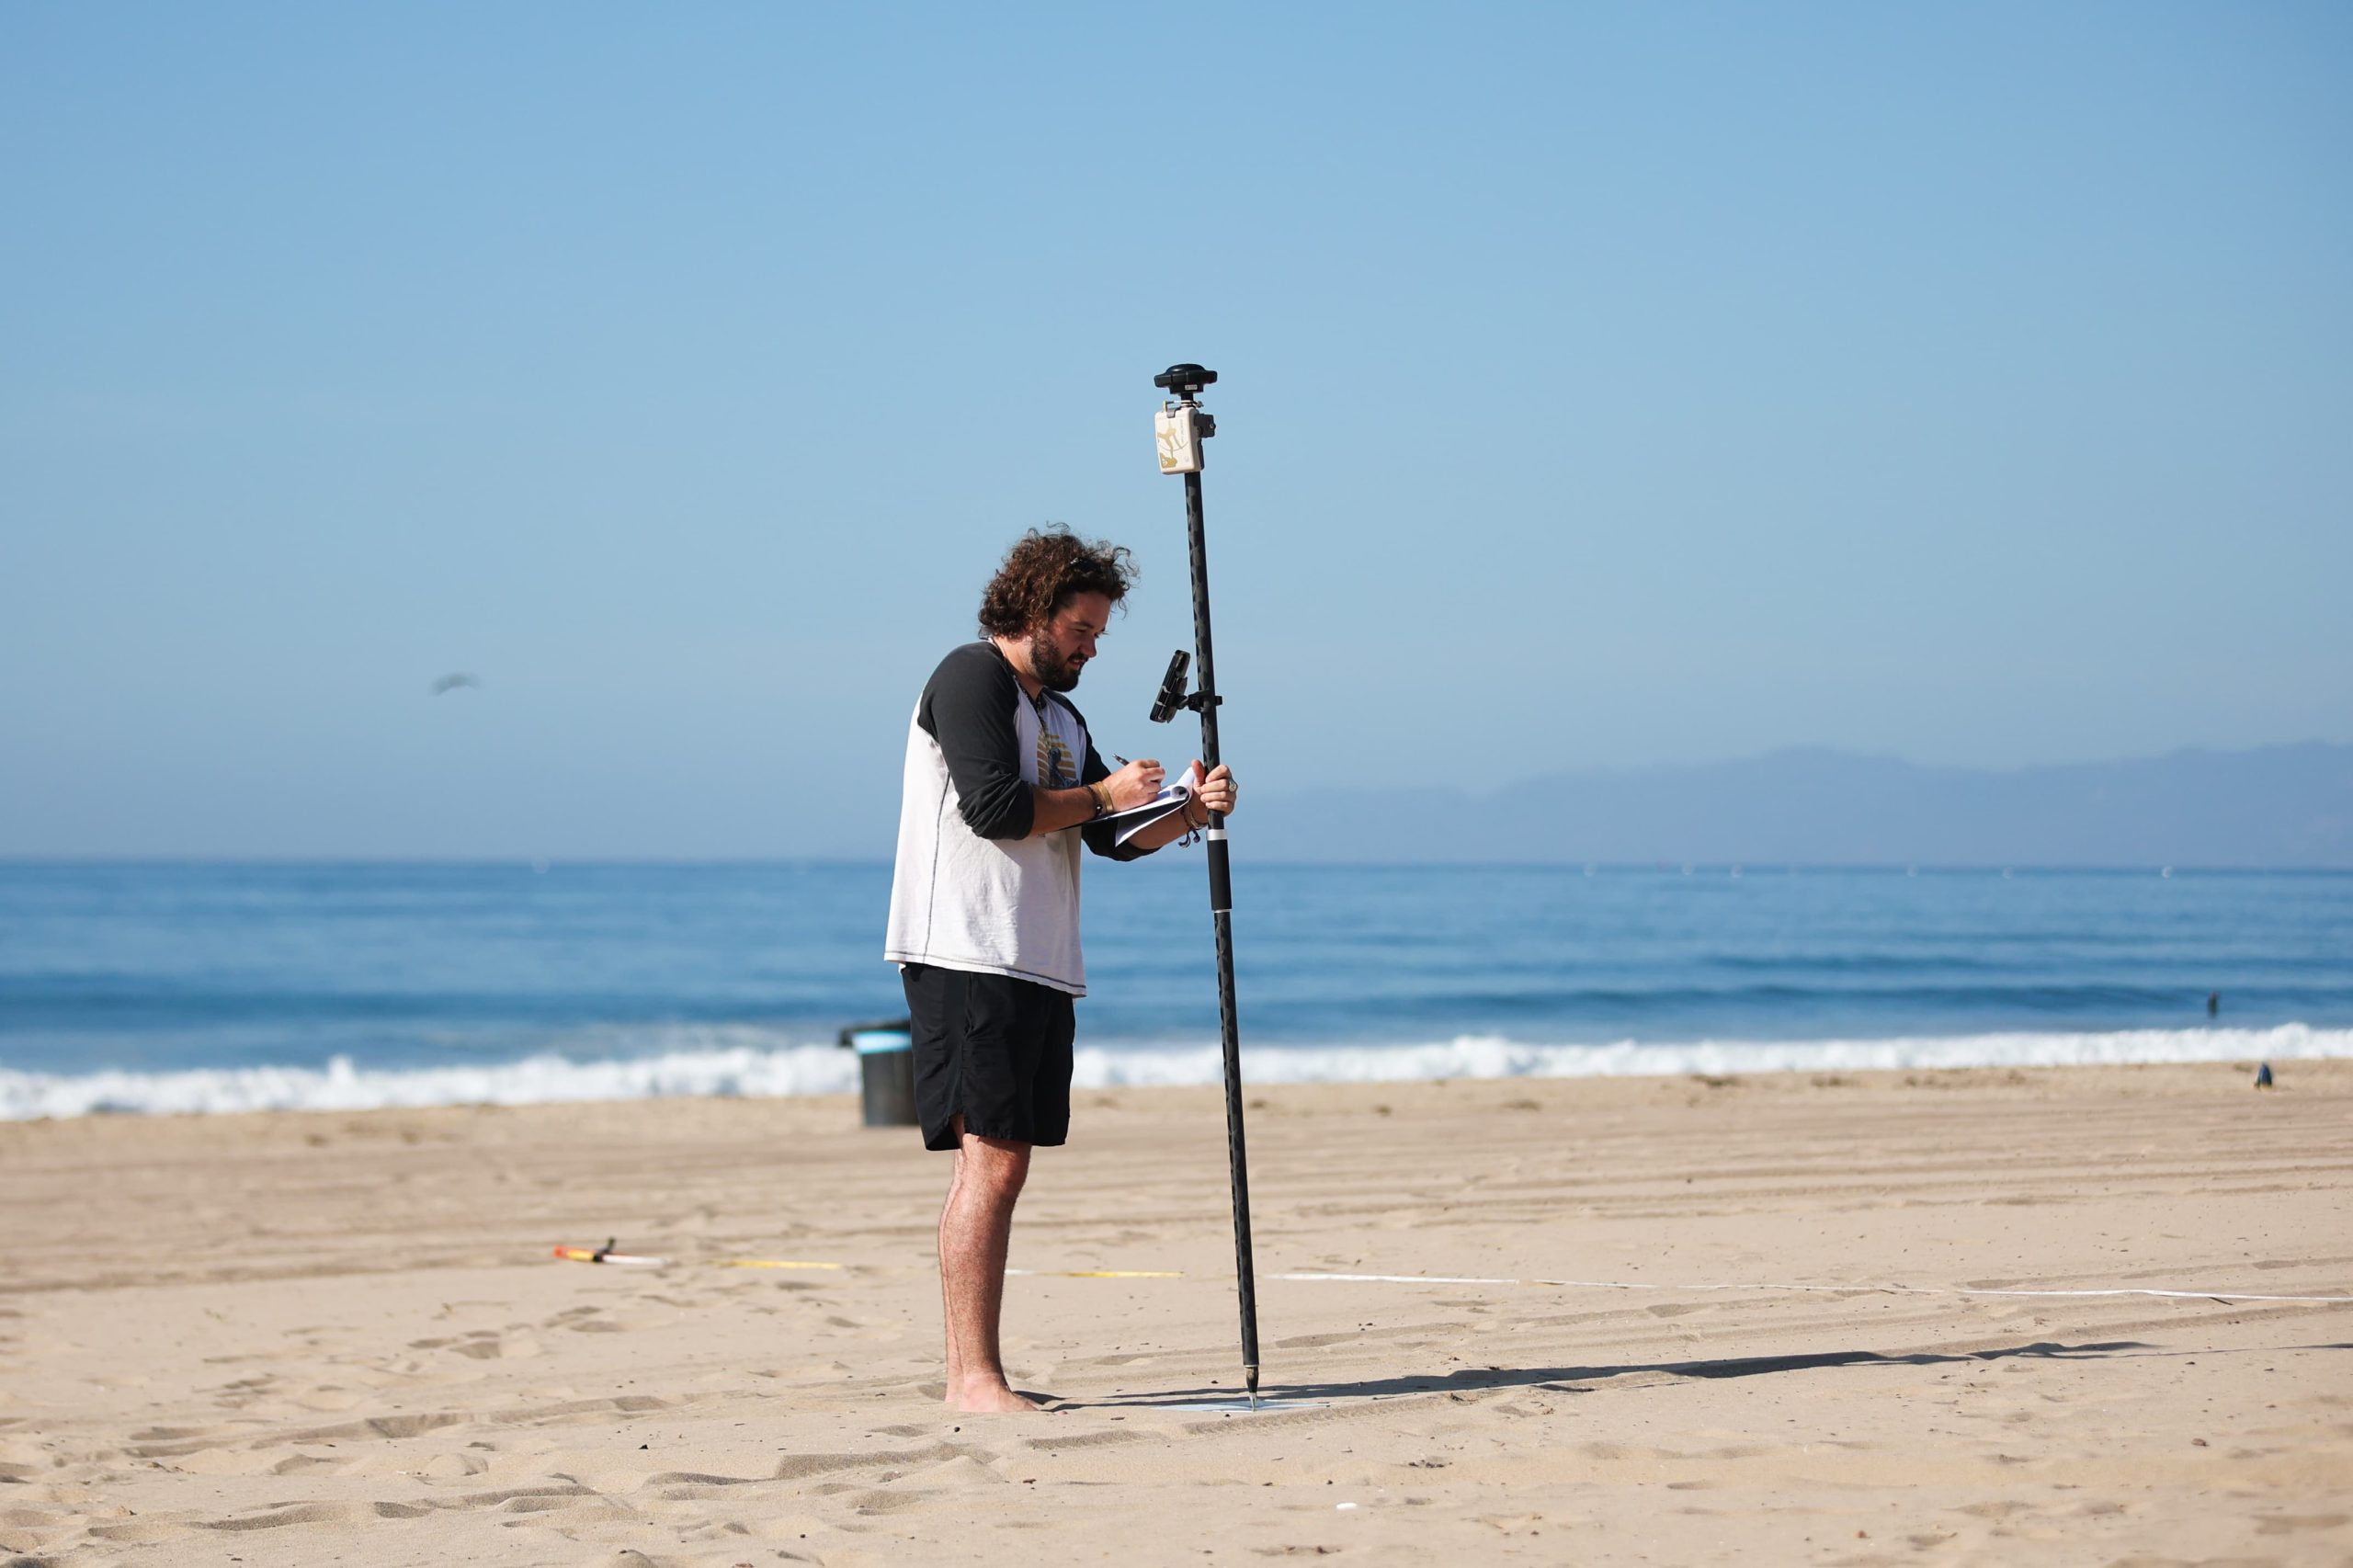 Max Callahan, Research Technician, University of California Los Angeles, Manhattan Beach, California, UCLA, beach and dune ecology research using Arrow Gold GNSS receiver with RTK corrections and ArcGIS Field Maps